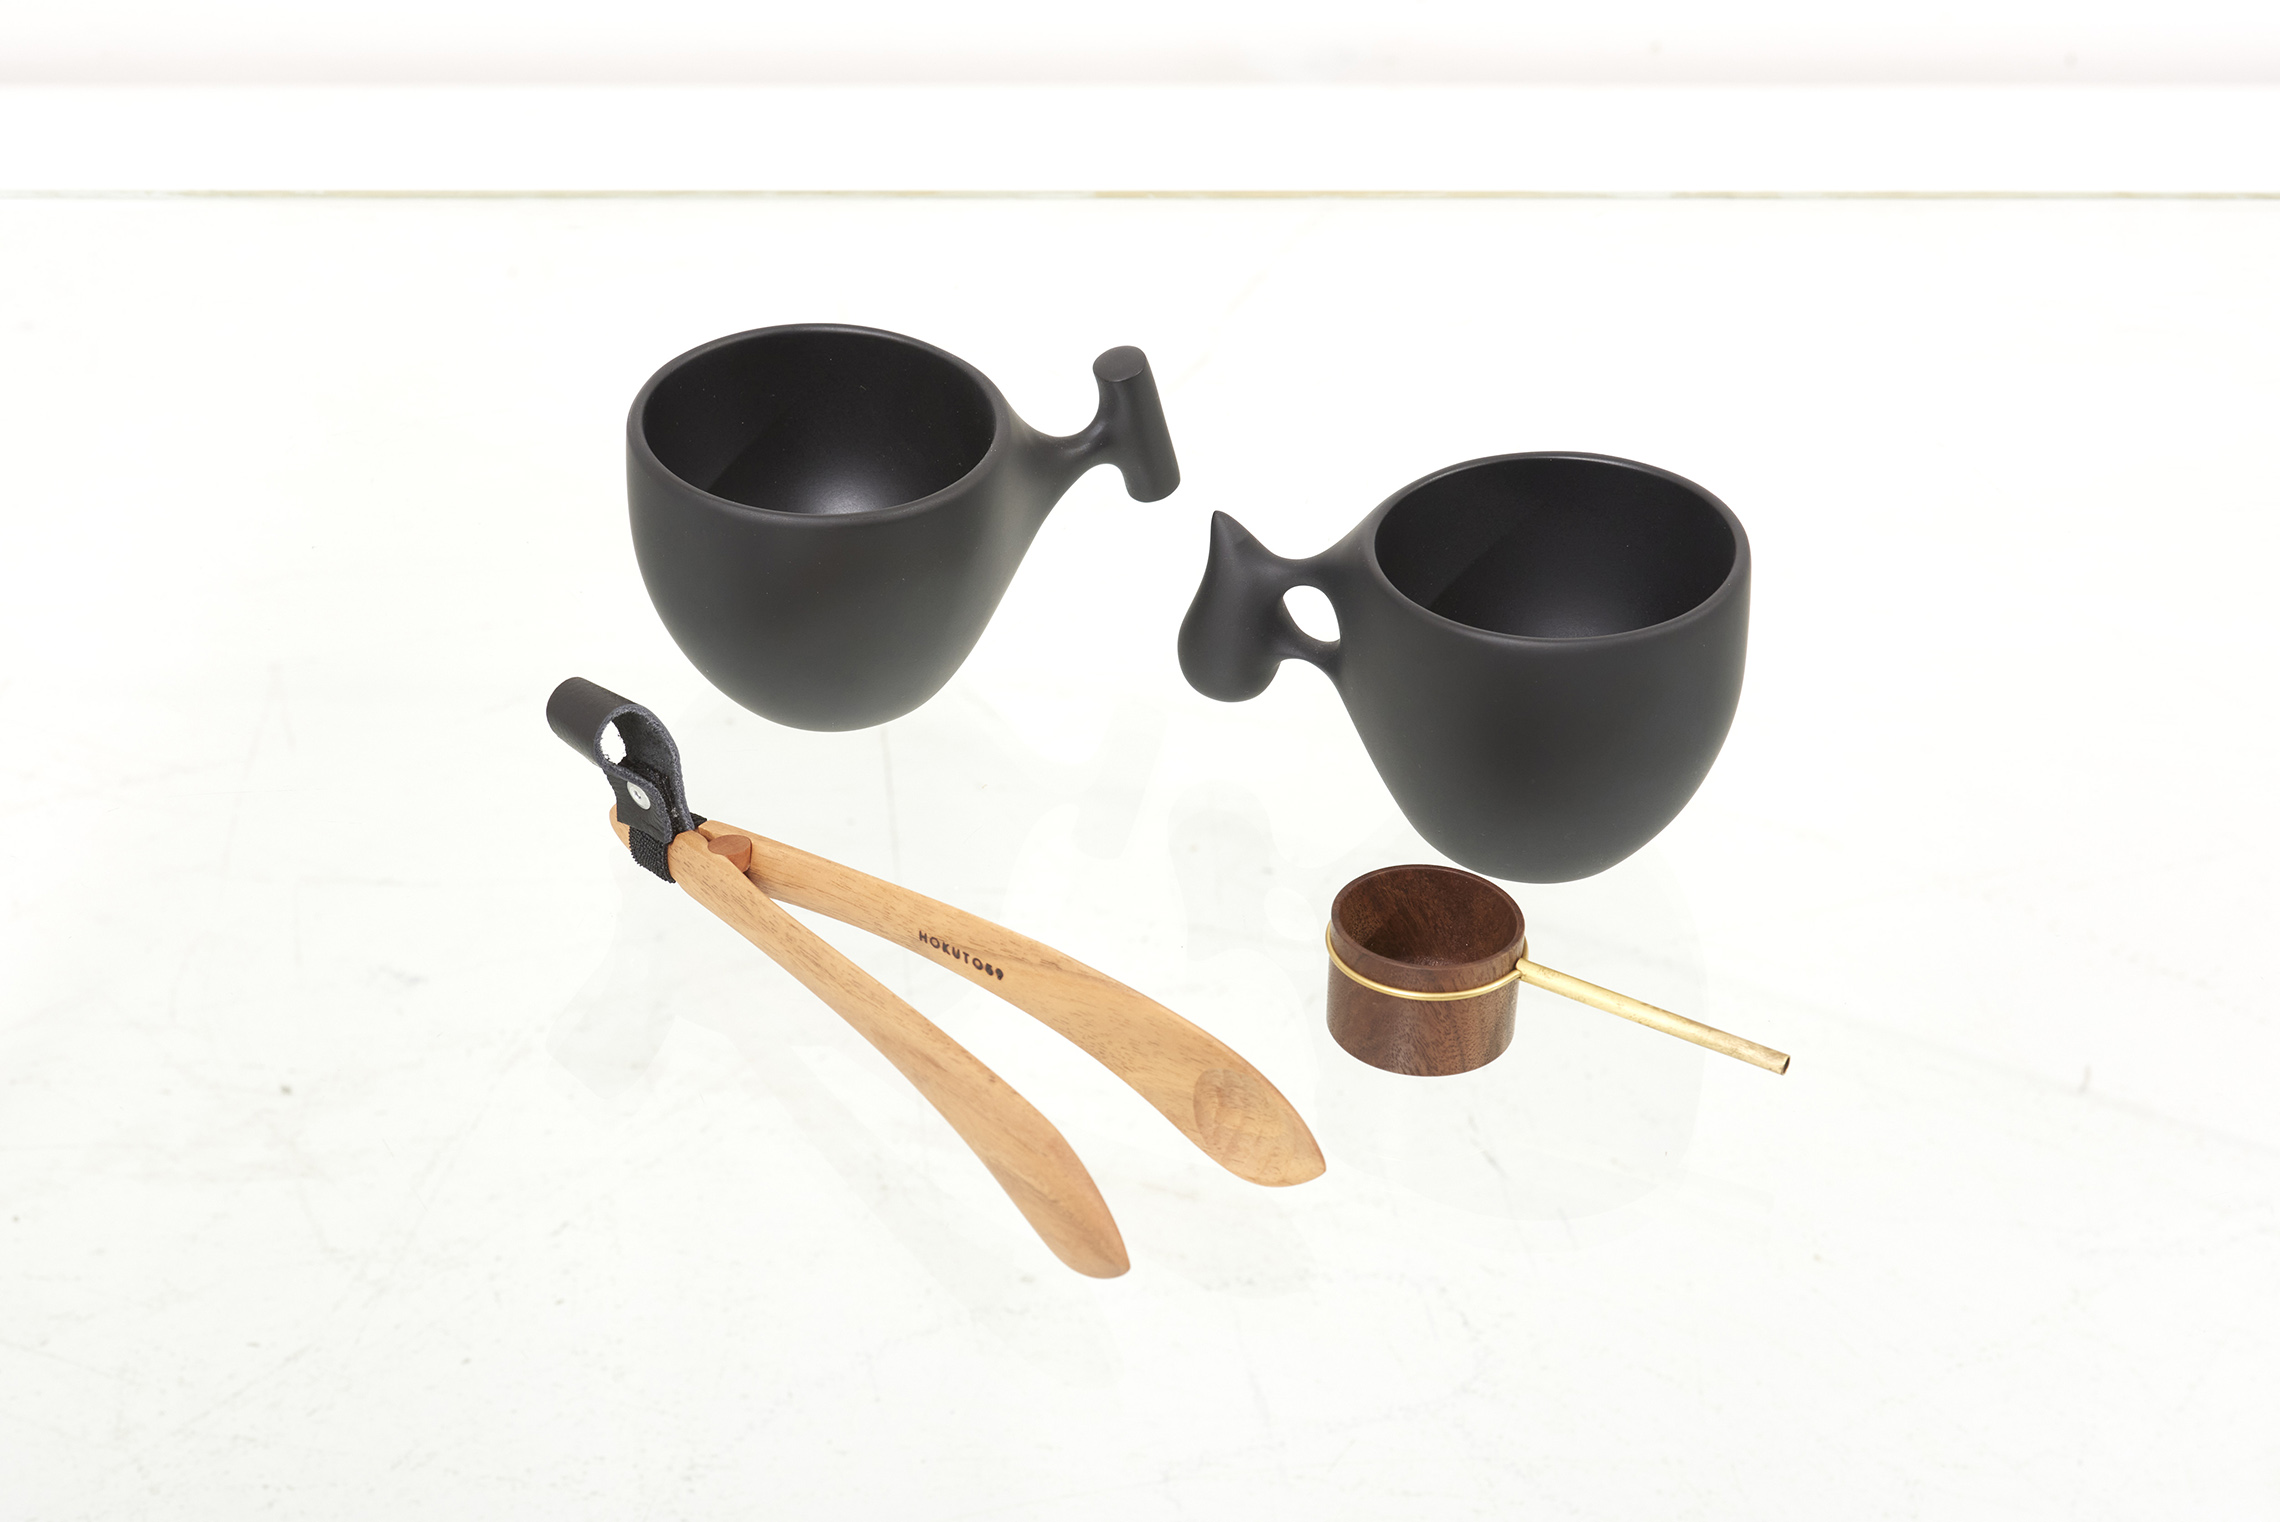 hand-crafted japanese furniture and wooden tableware